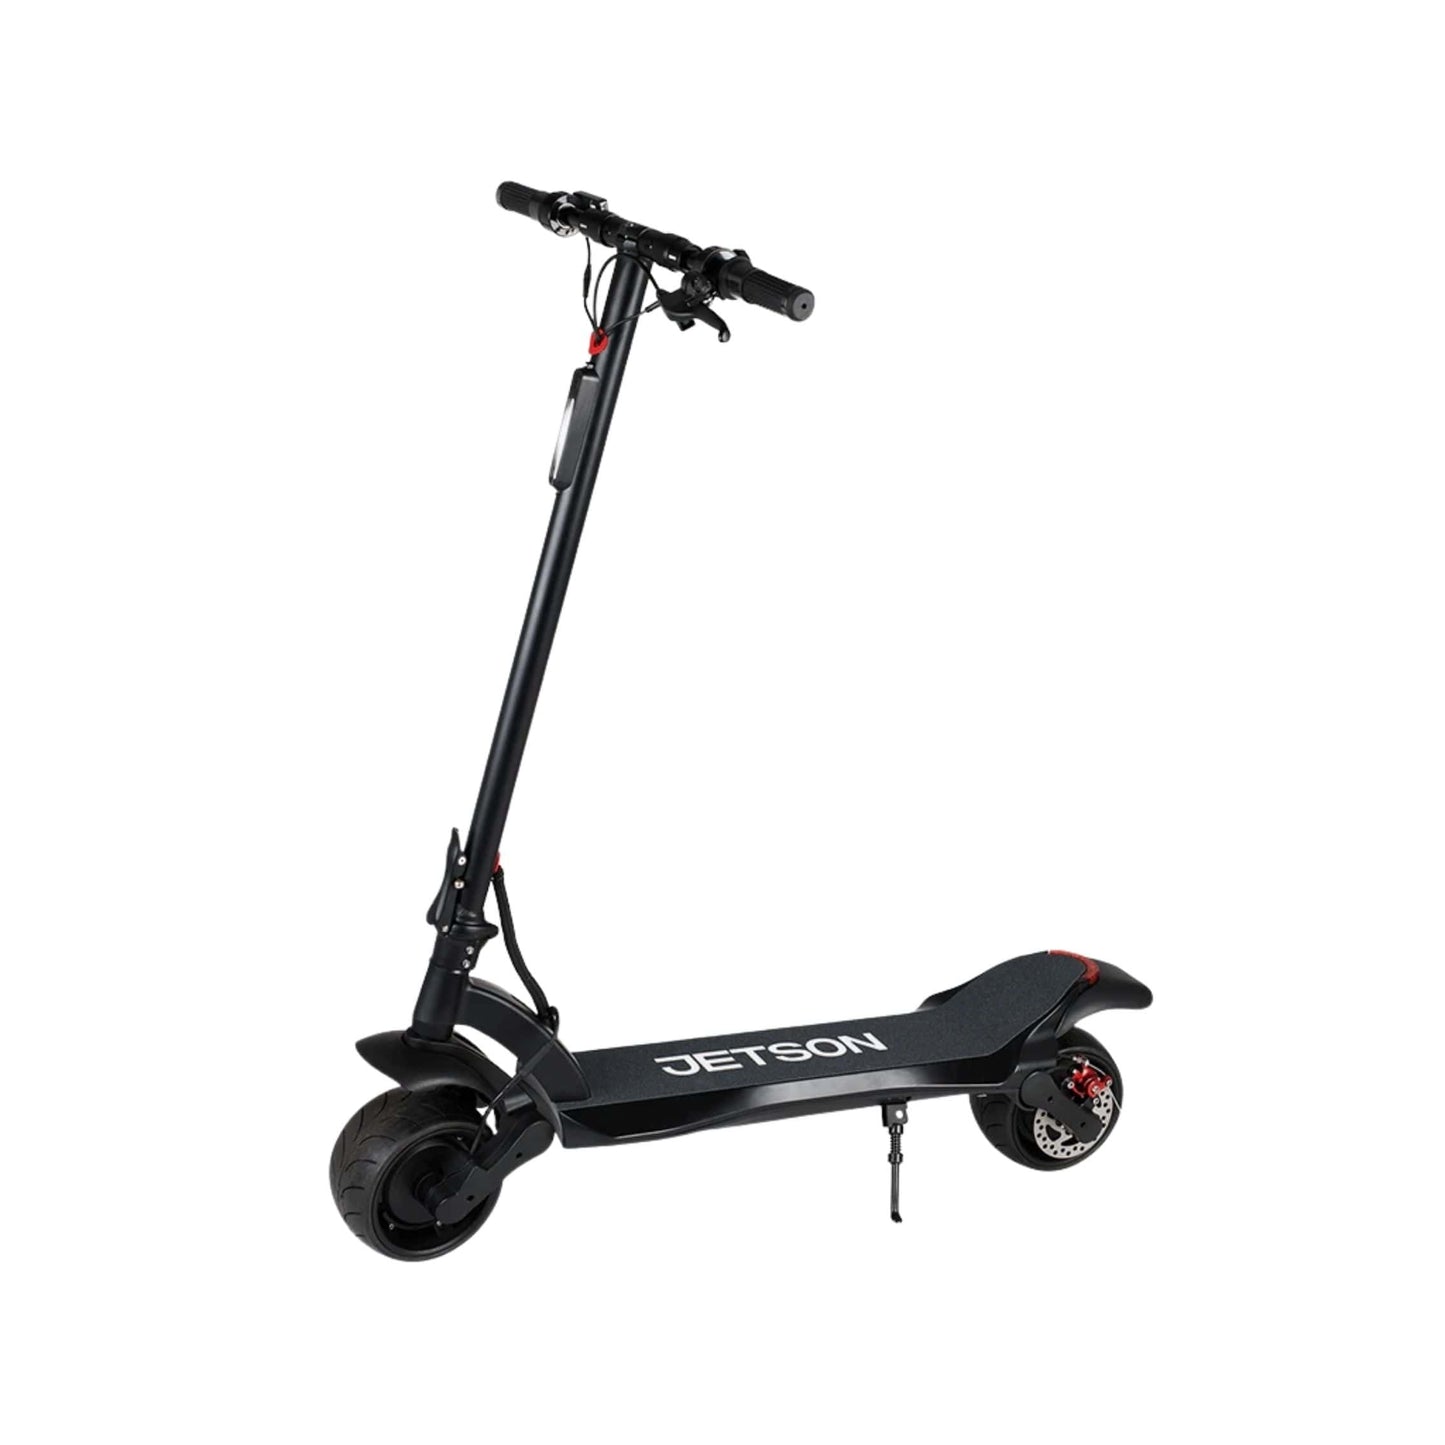 Jetson Globe Electric Scooter